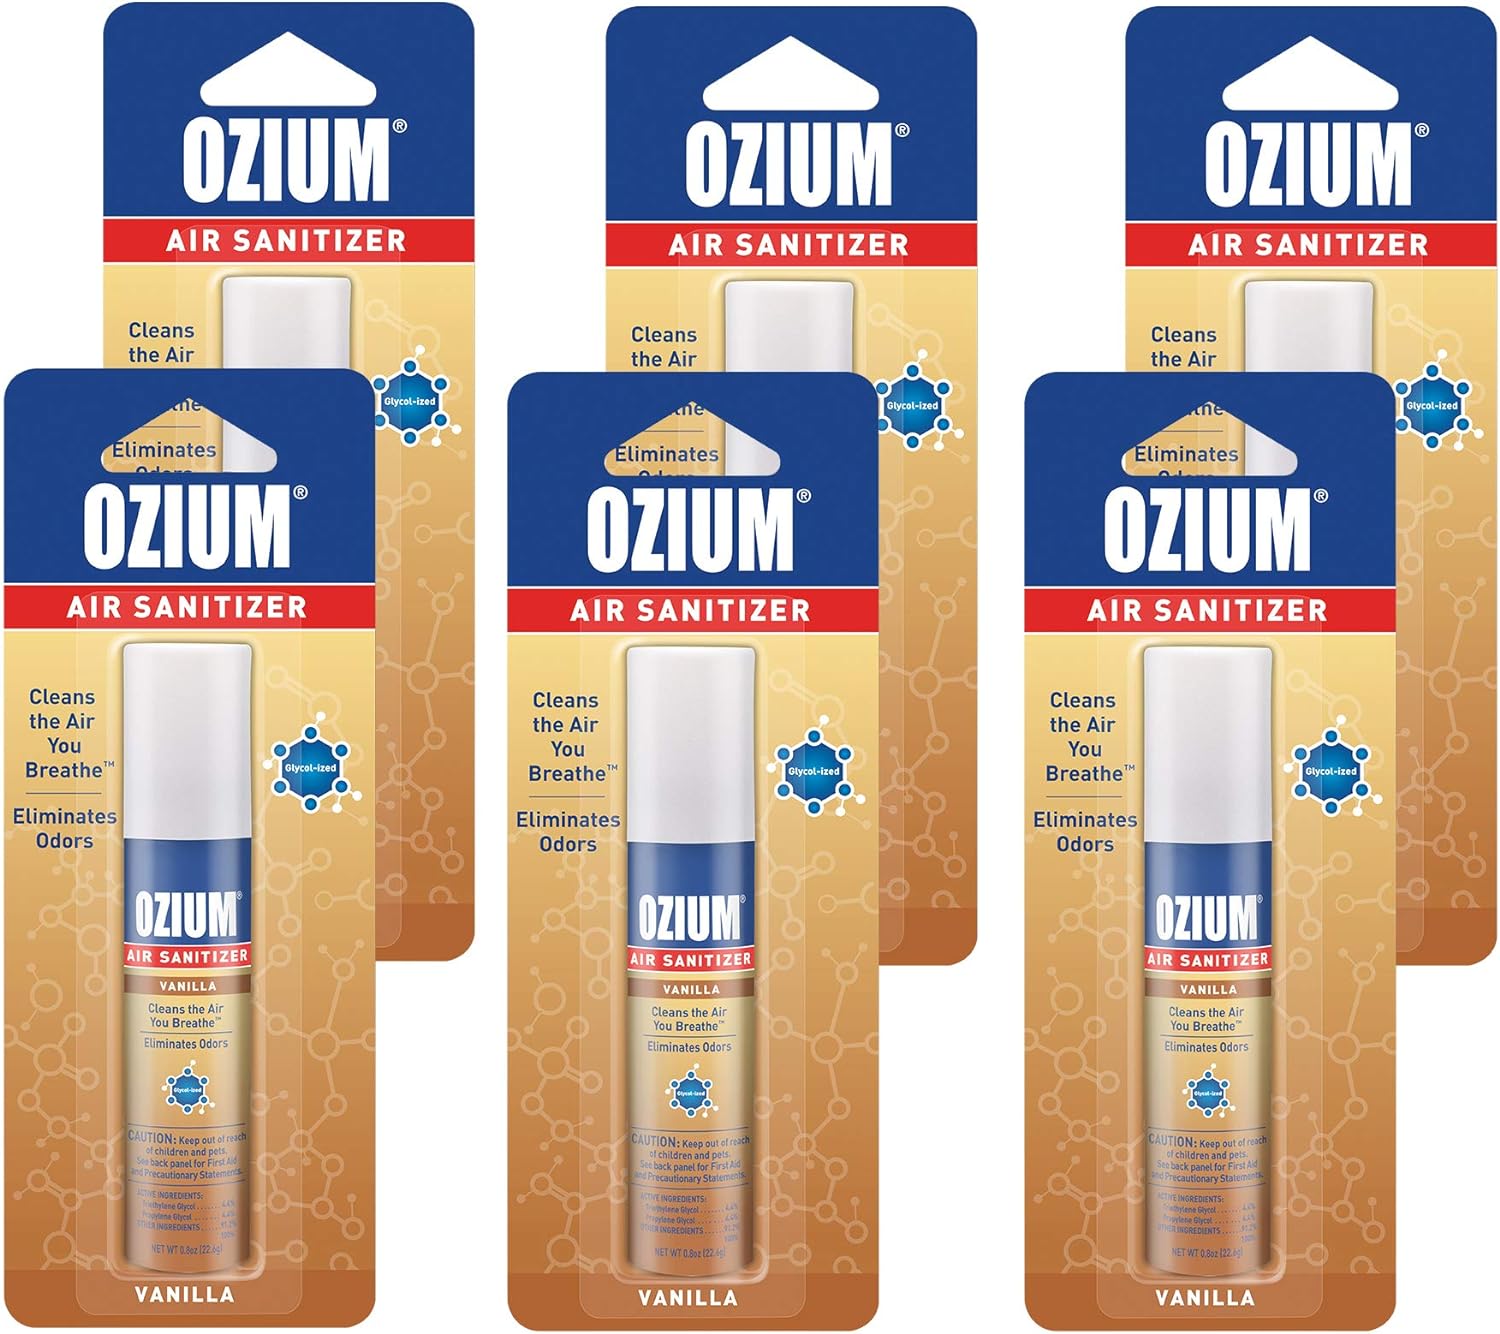 Ozium 0.8 oz. Air Sanitizer & Odor Eliminator for Homes, Cars, Offices and More, Vanilla Scent, Pack of 6